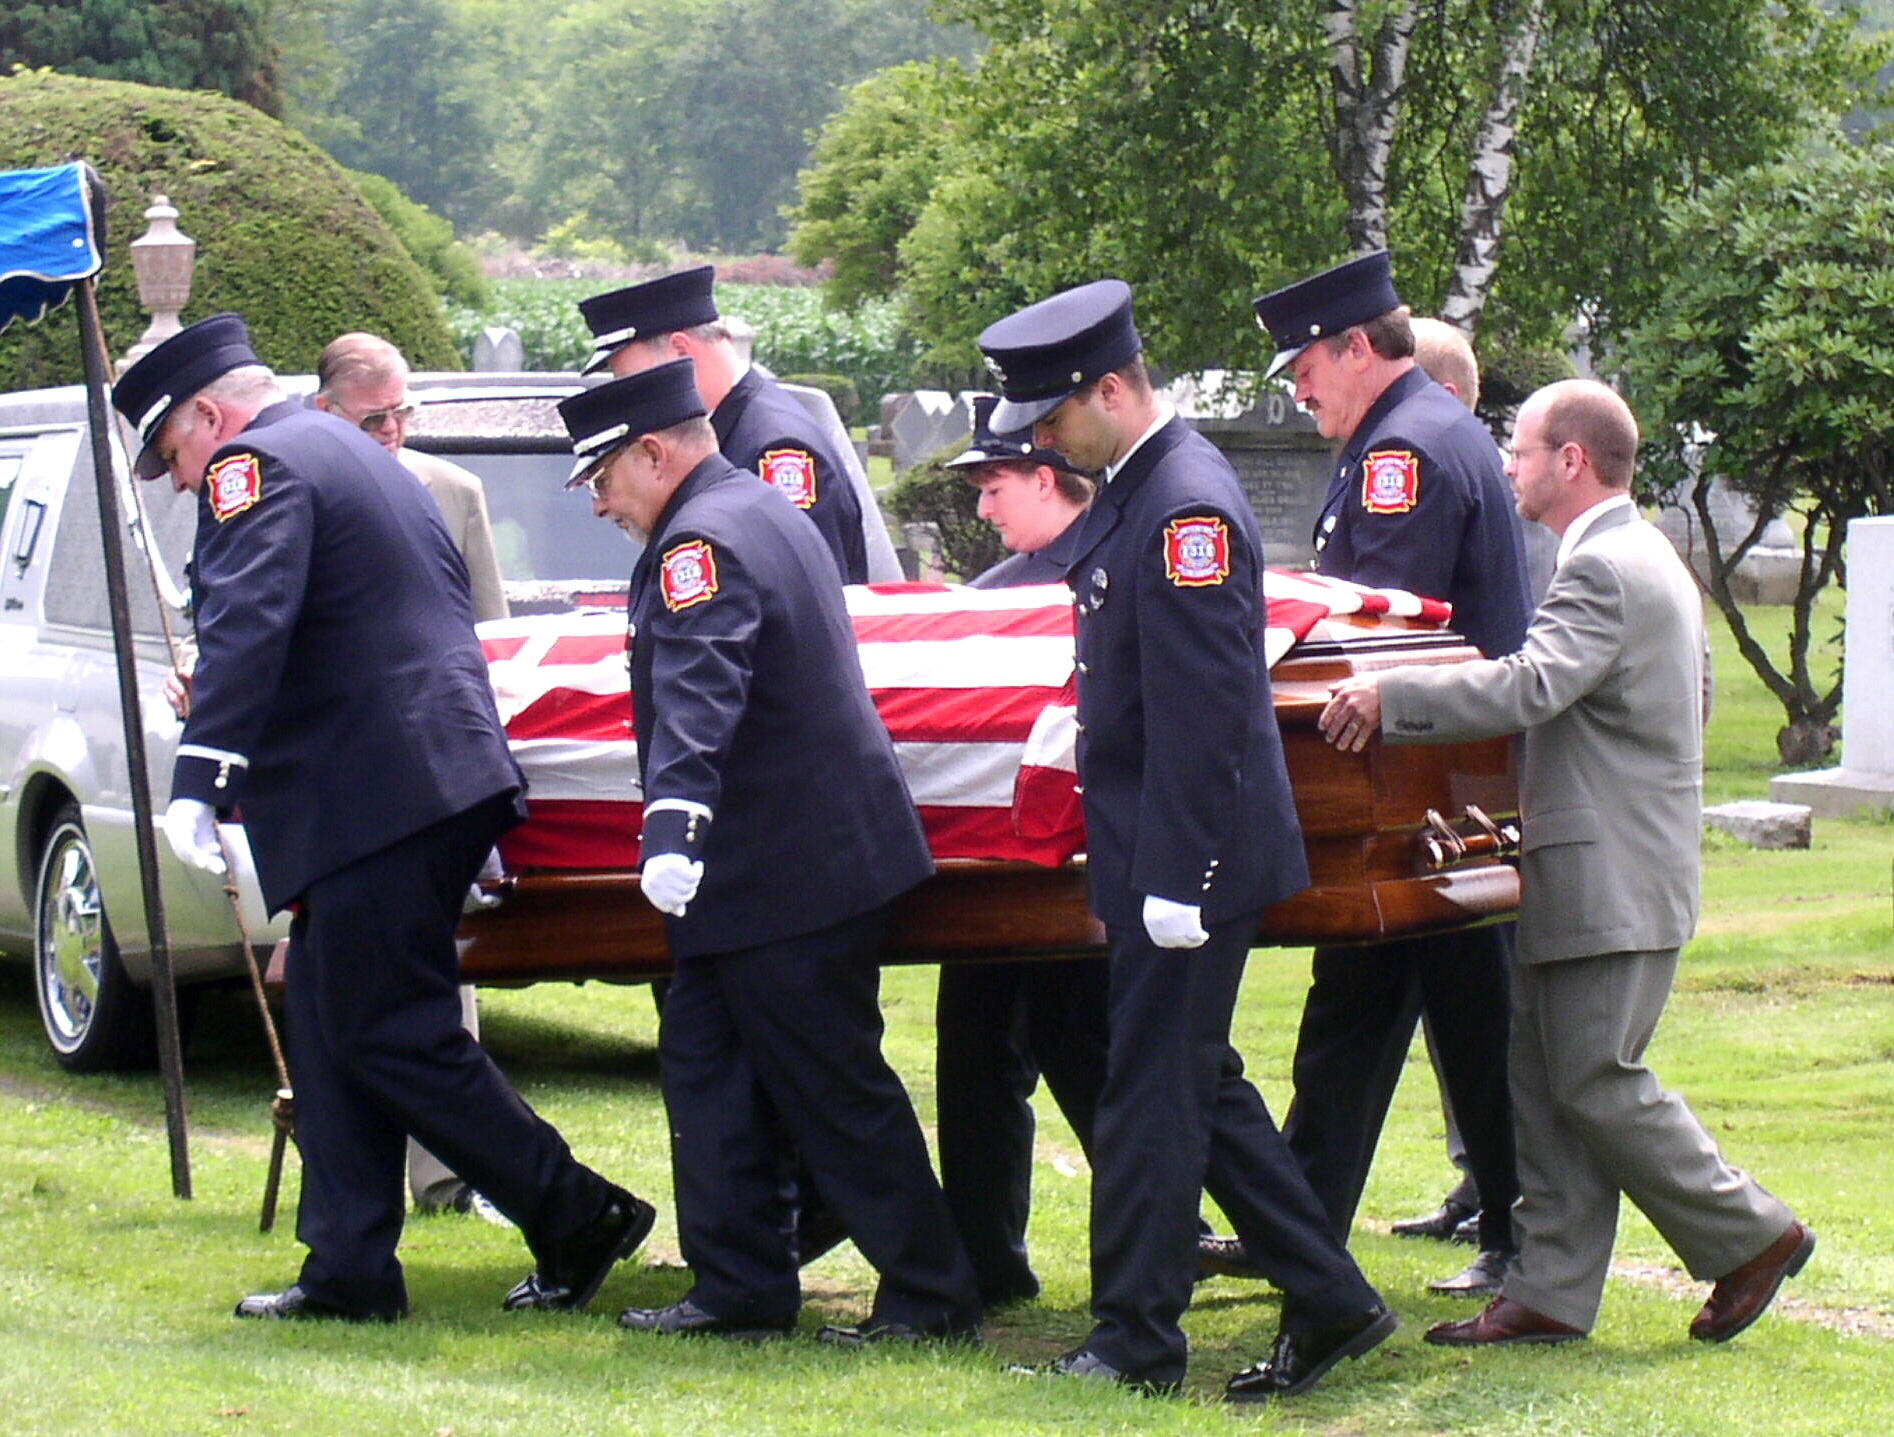 07-20-04  Other - Hollenbeck Funeral